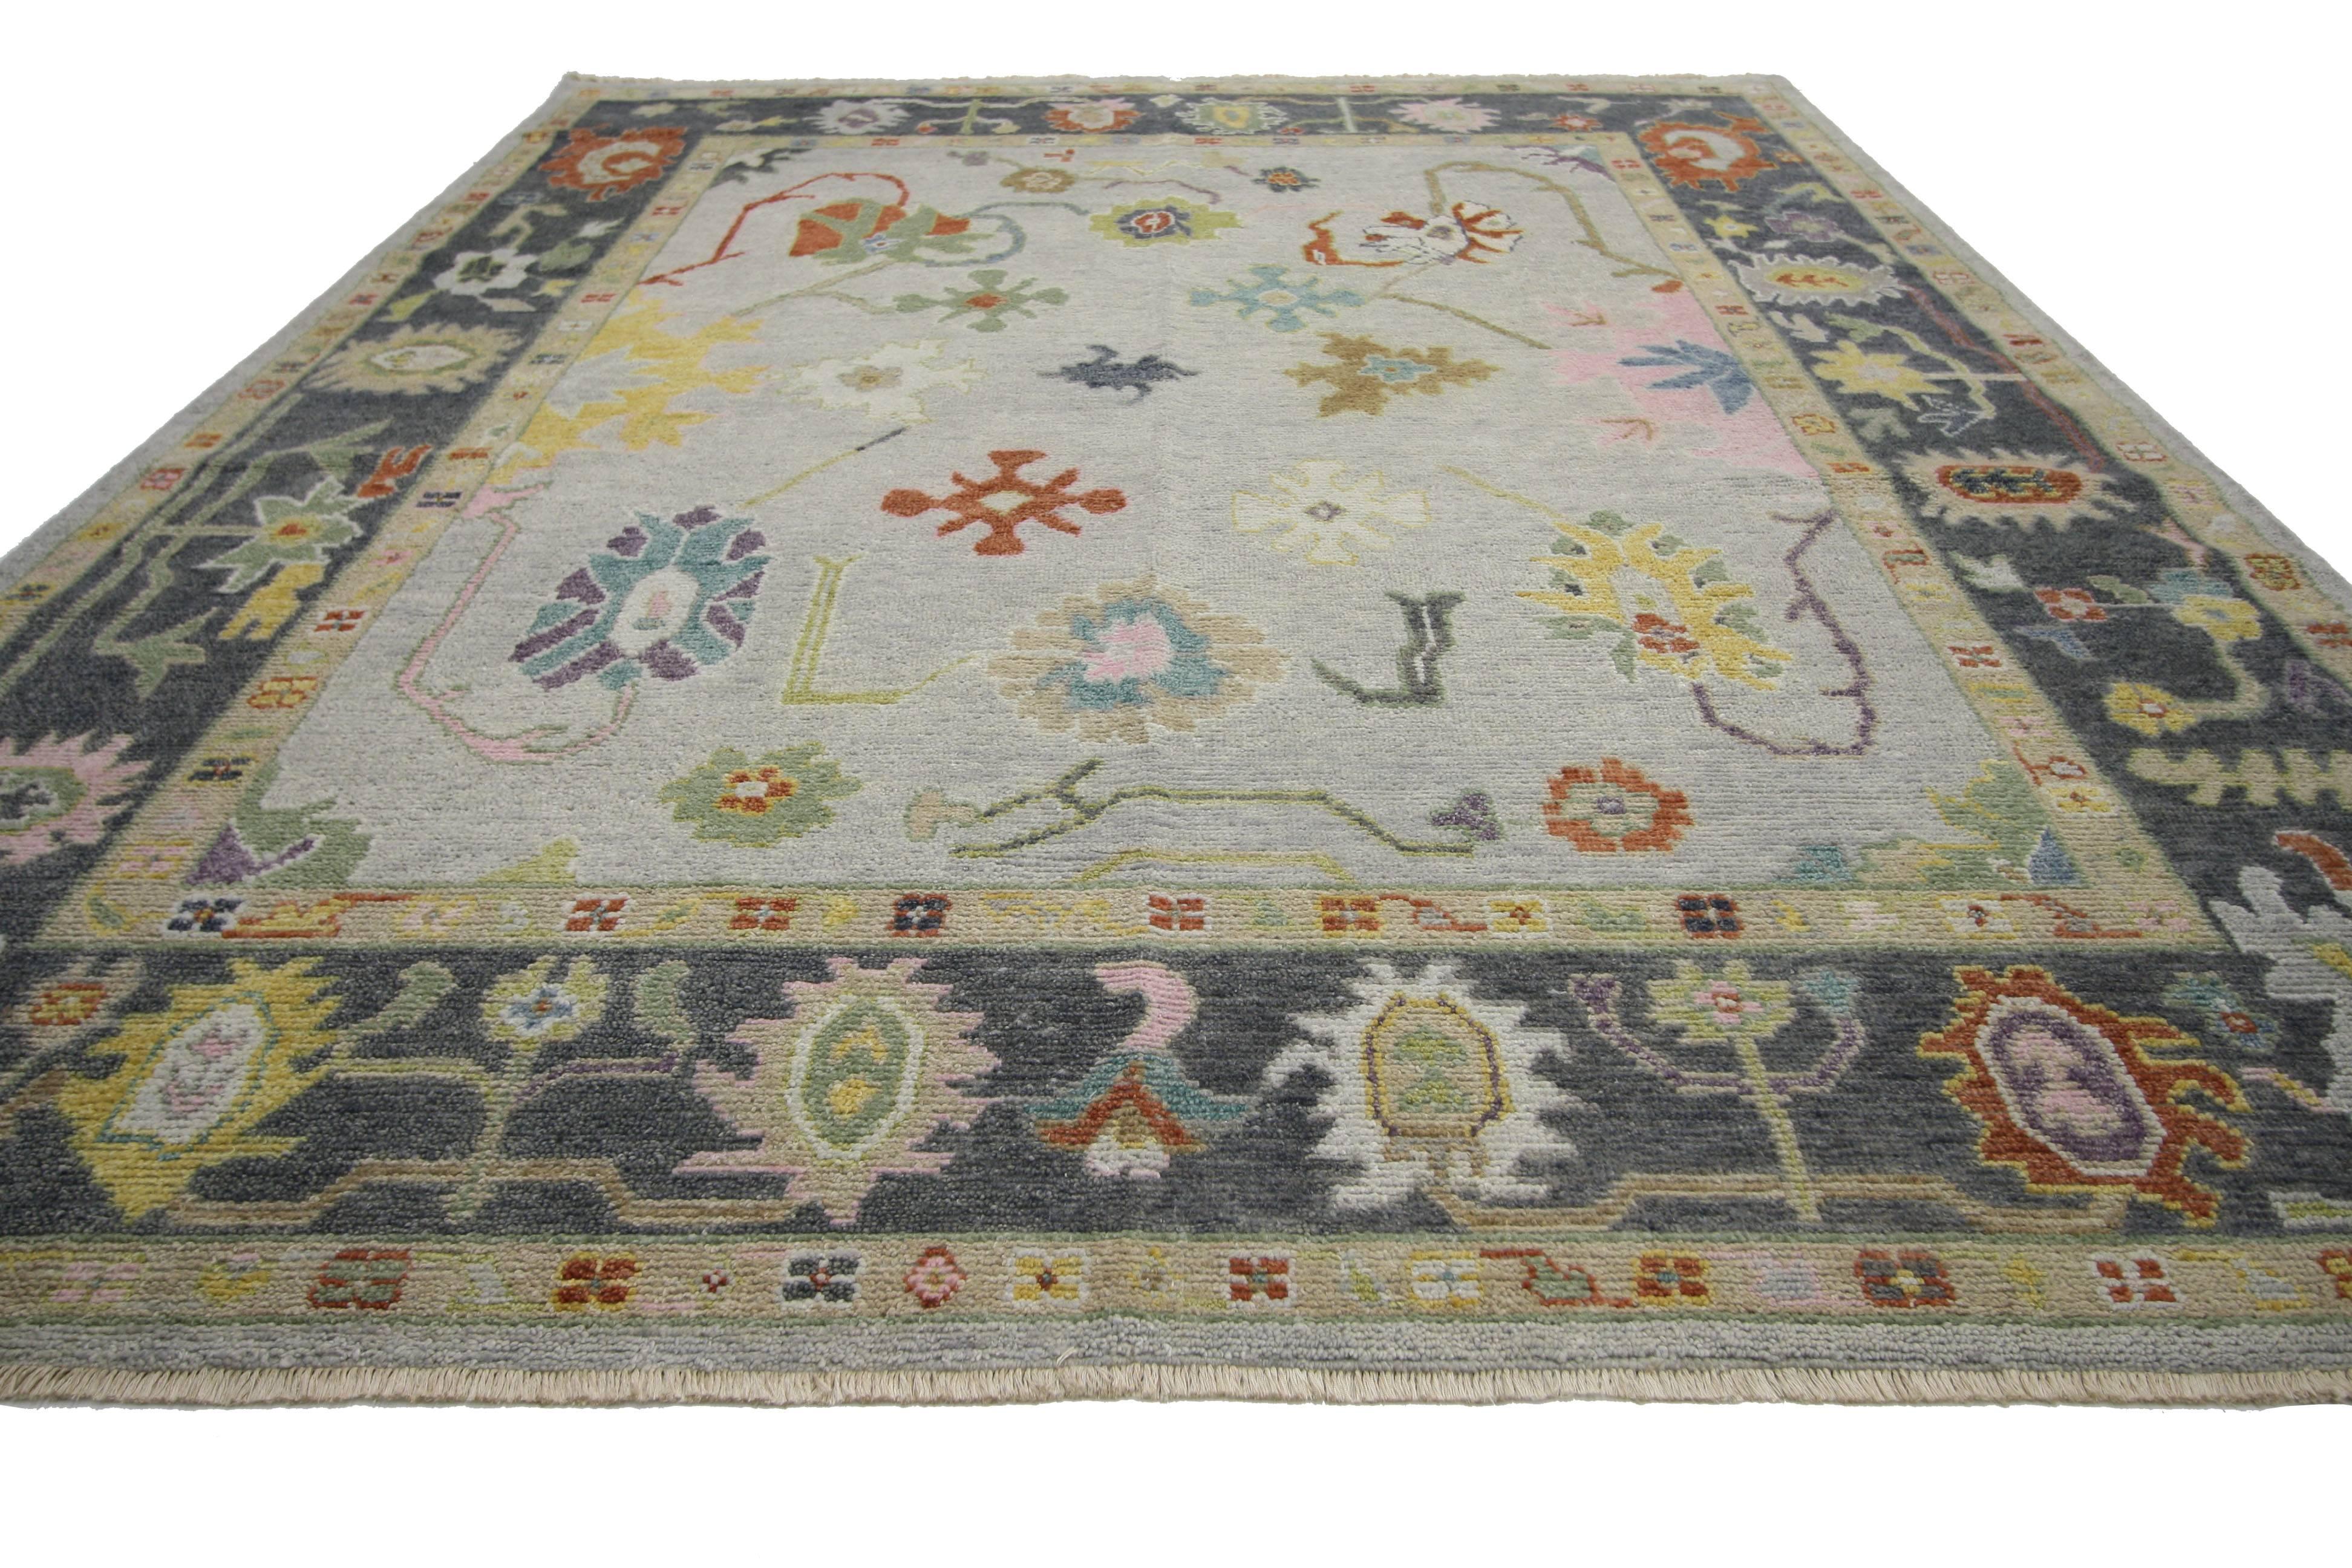 30369 New Contemporary Oushak Style Rug with Boho Chic Style and Modern Design 07'07 x 10'00. Highly stylish yet tastefully casual, this contemporary Oushak style rug with modern design is ideal for nearly any fashion-forward home. This timeless